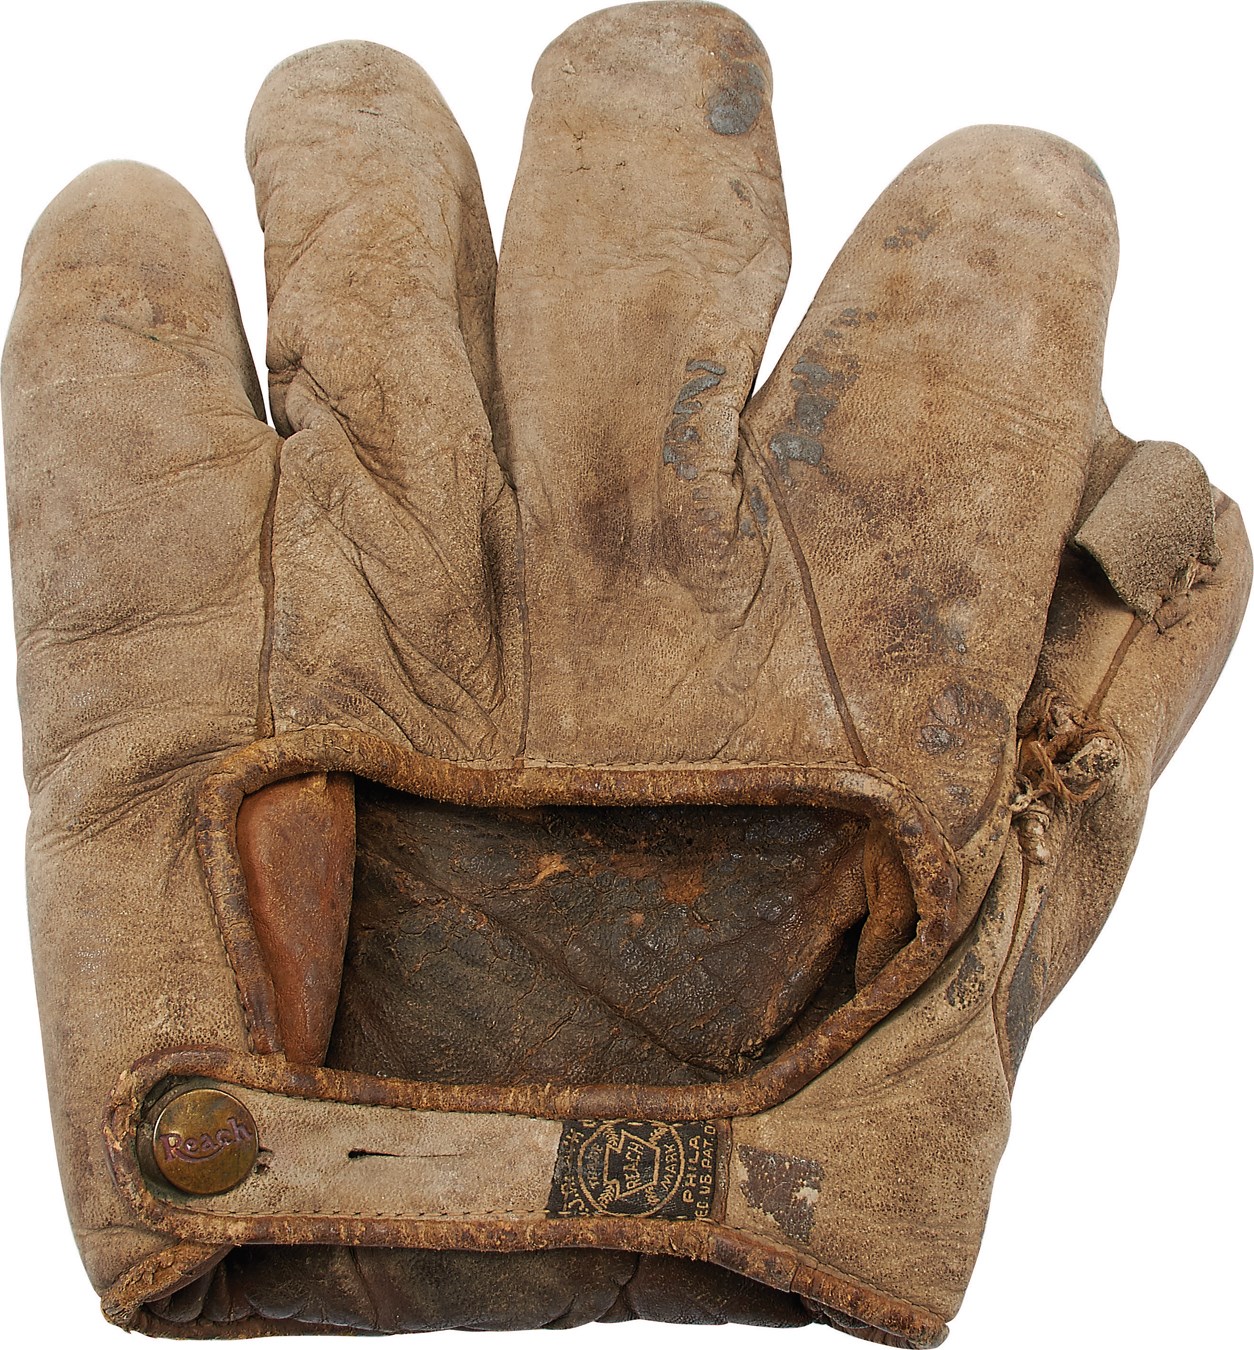 - 1926-29 Grover Cleveland Alexander Game Used Glove